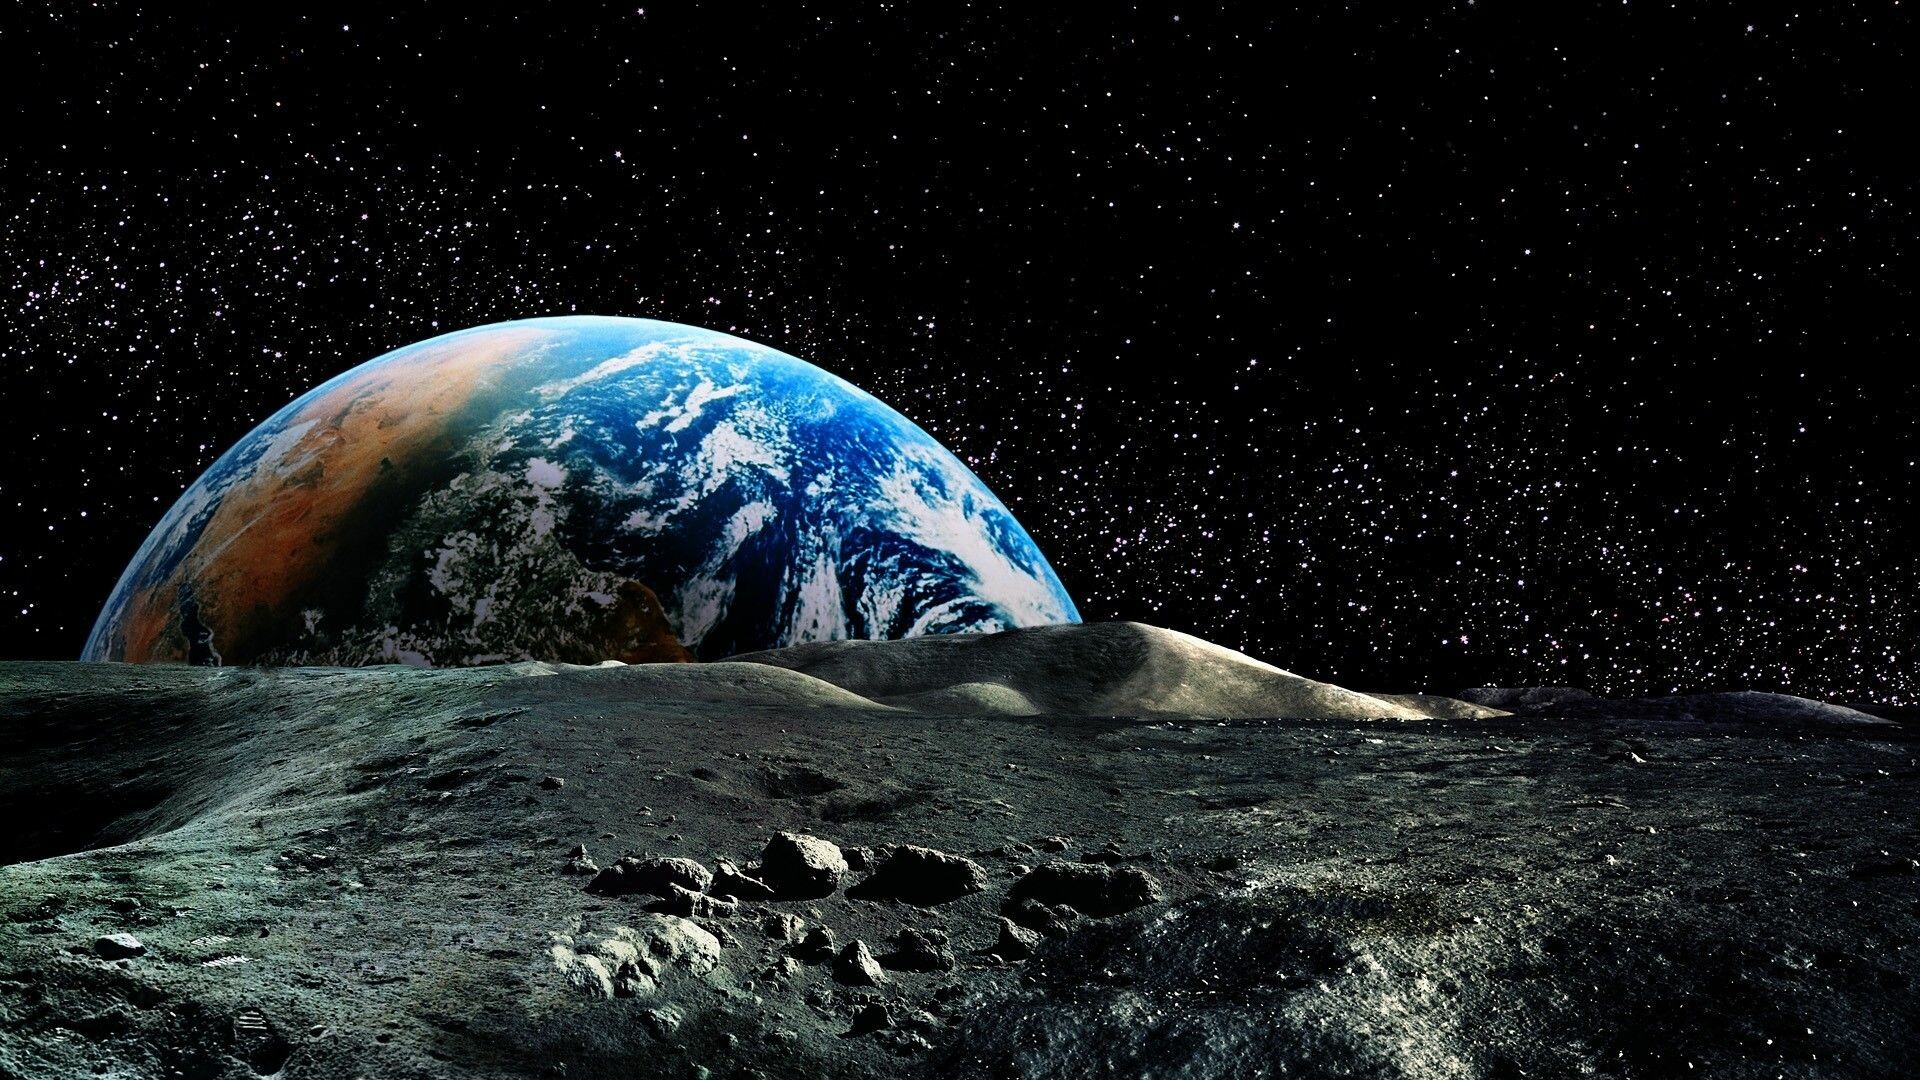 Planet Earth Wallpaper 1920x1080 (84+ images)